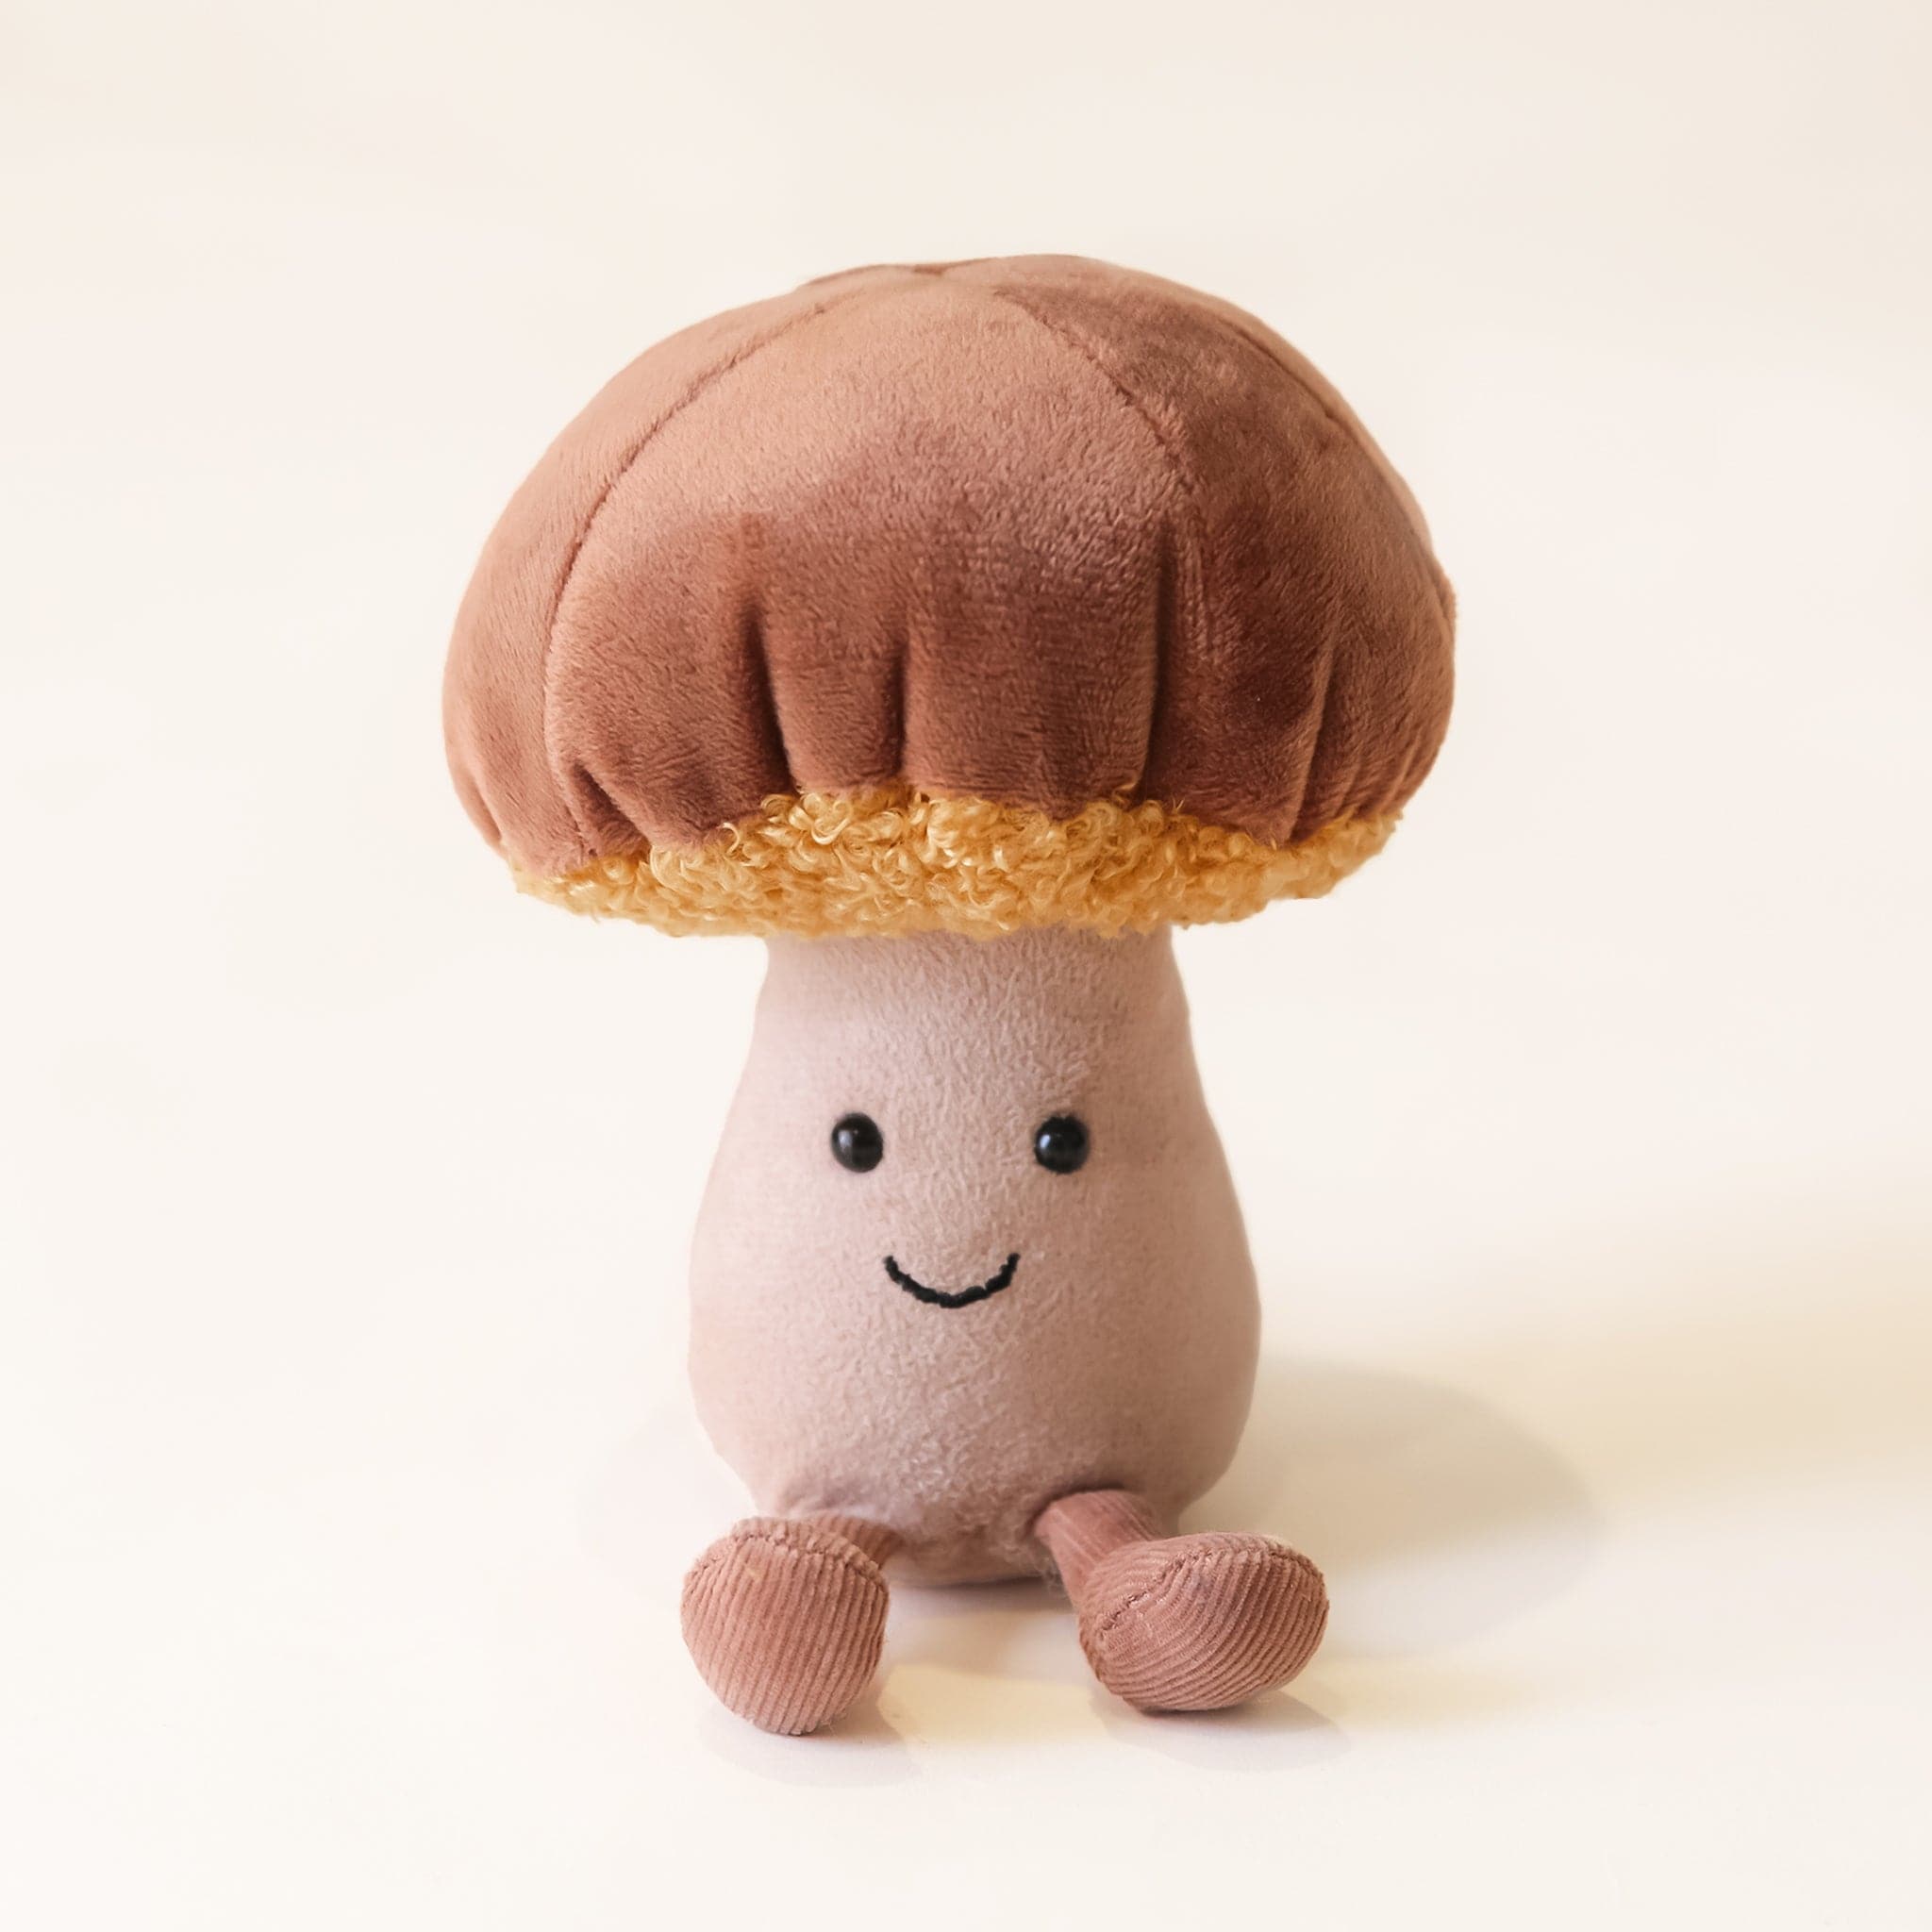 A soft suede stuffed animal in the shape of a mushroom with light brown cap with curly soft gold underneath, a tan colored stalk with smiley face and brown floppy legs.